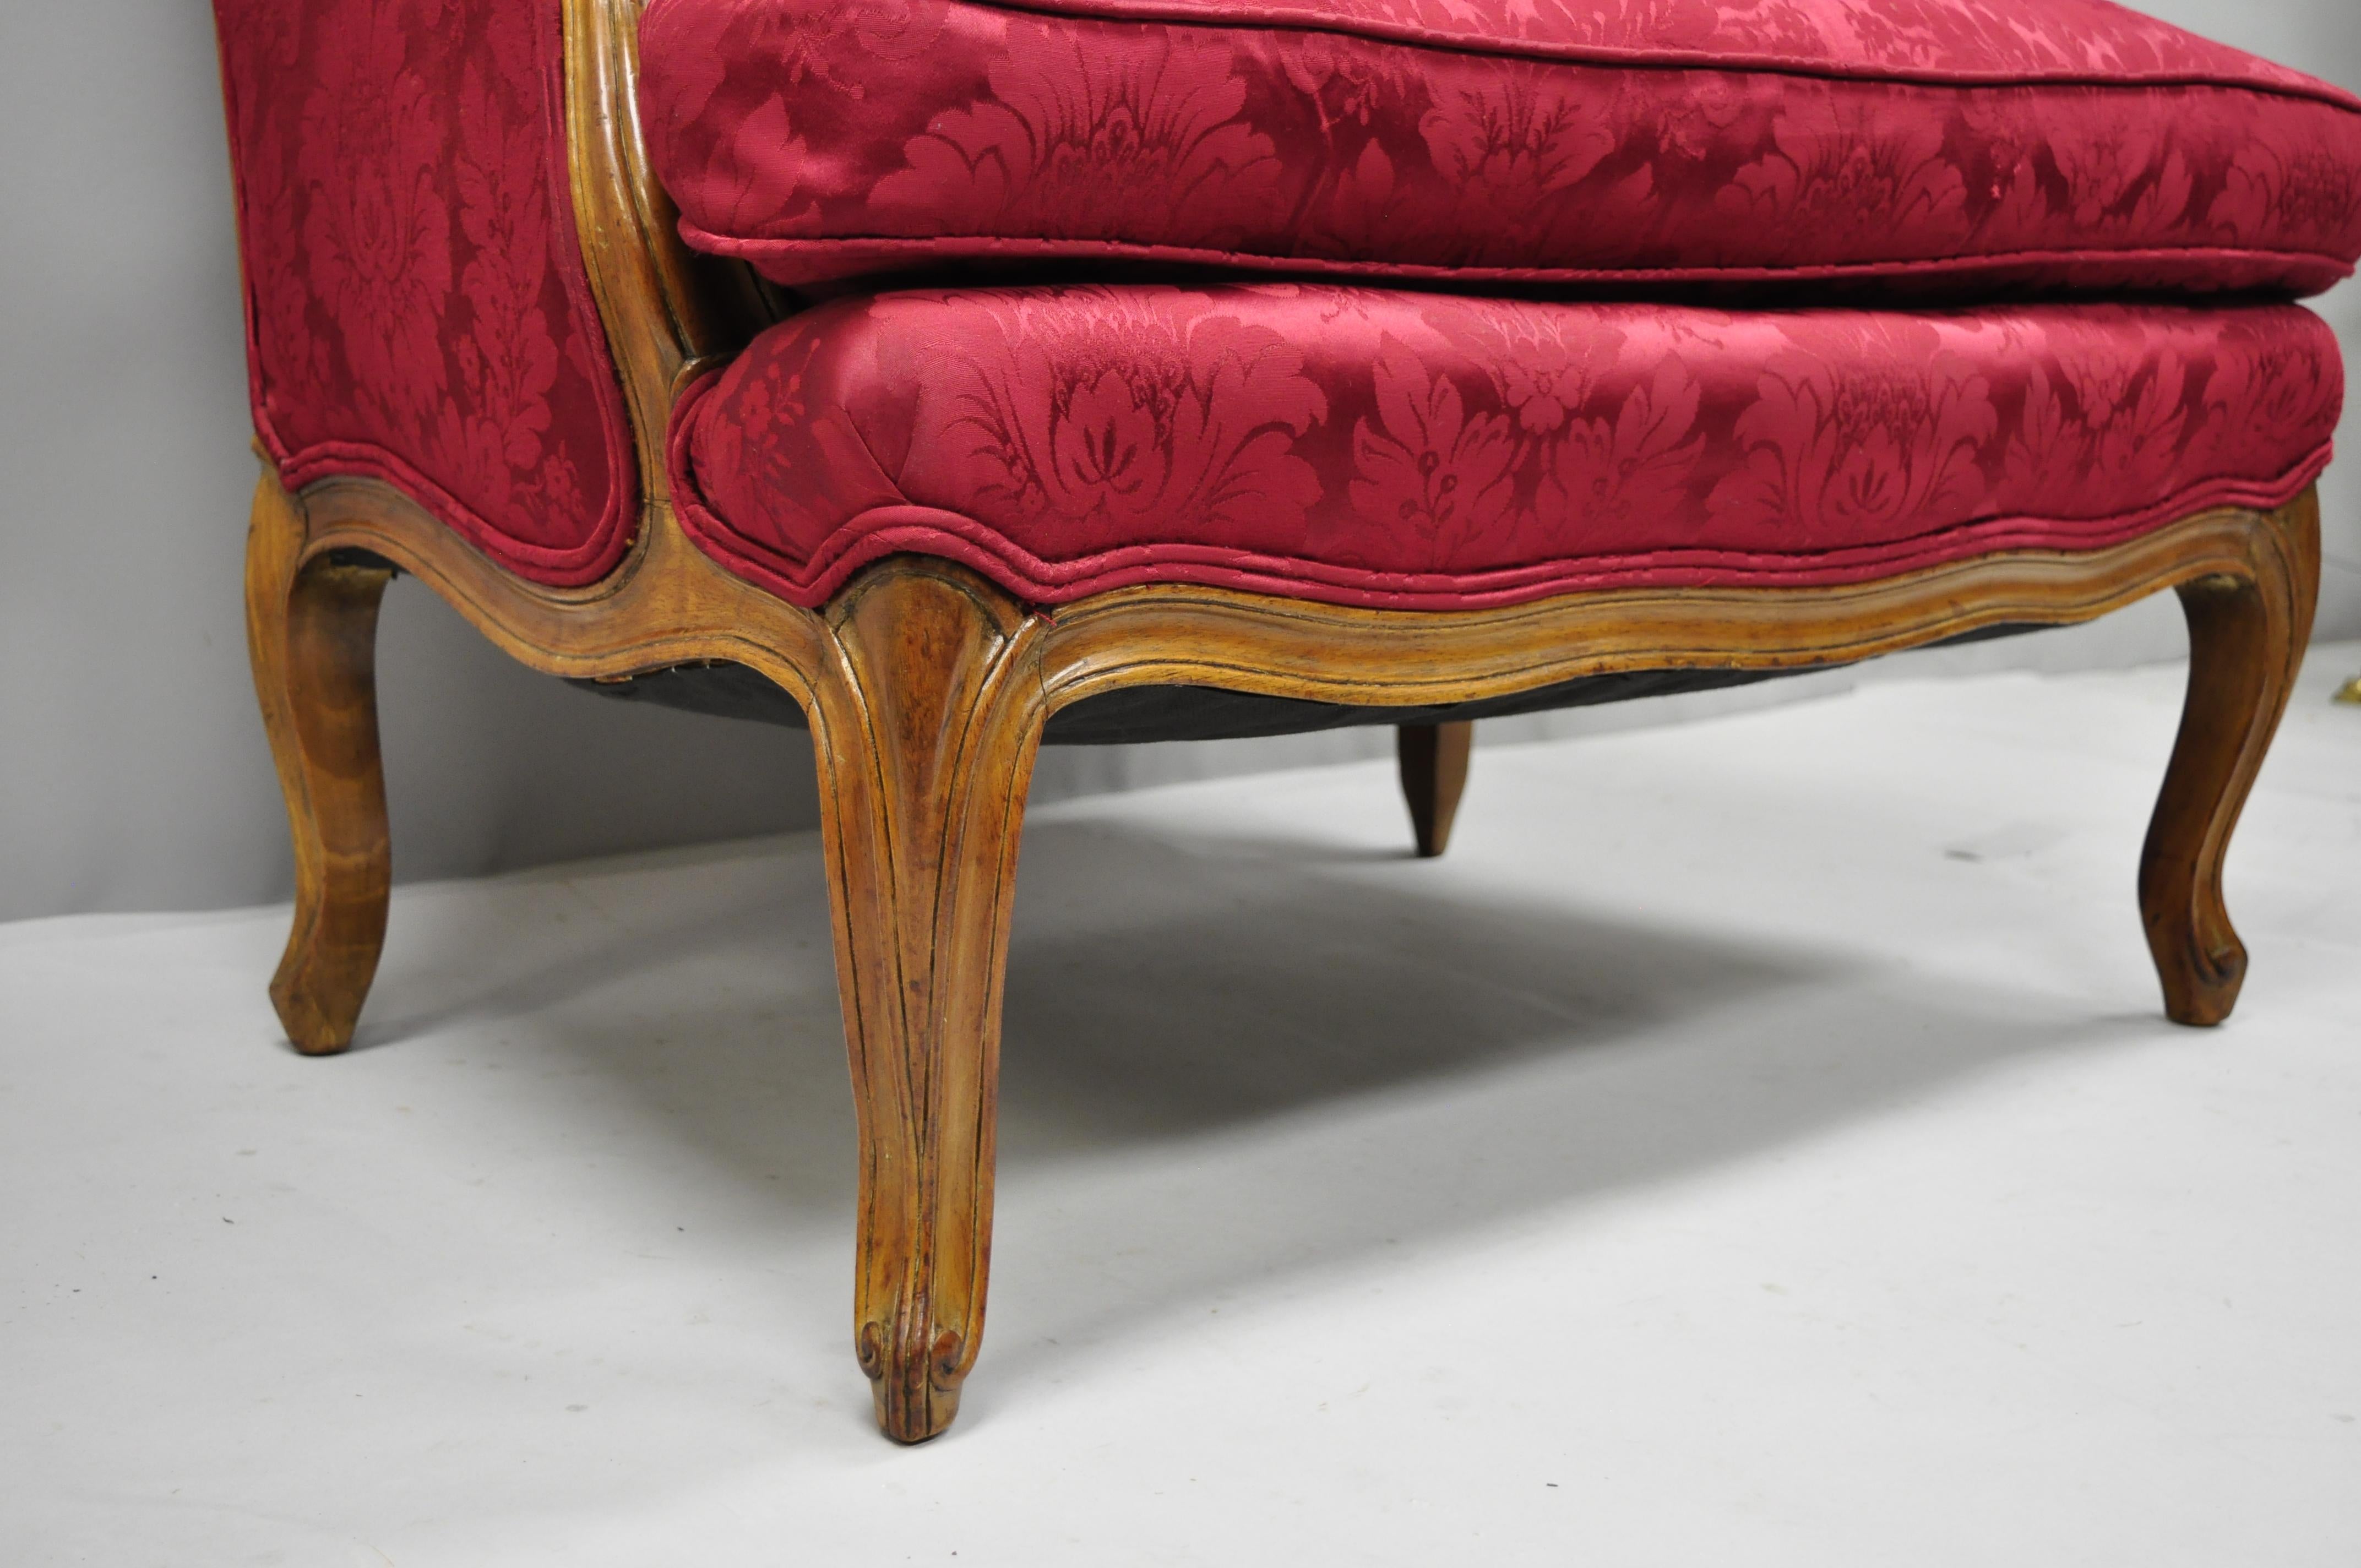 French Country Louis XV Style Carved Mahogany Burgundy Wingback Settee Sofa For Sale 2